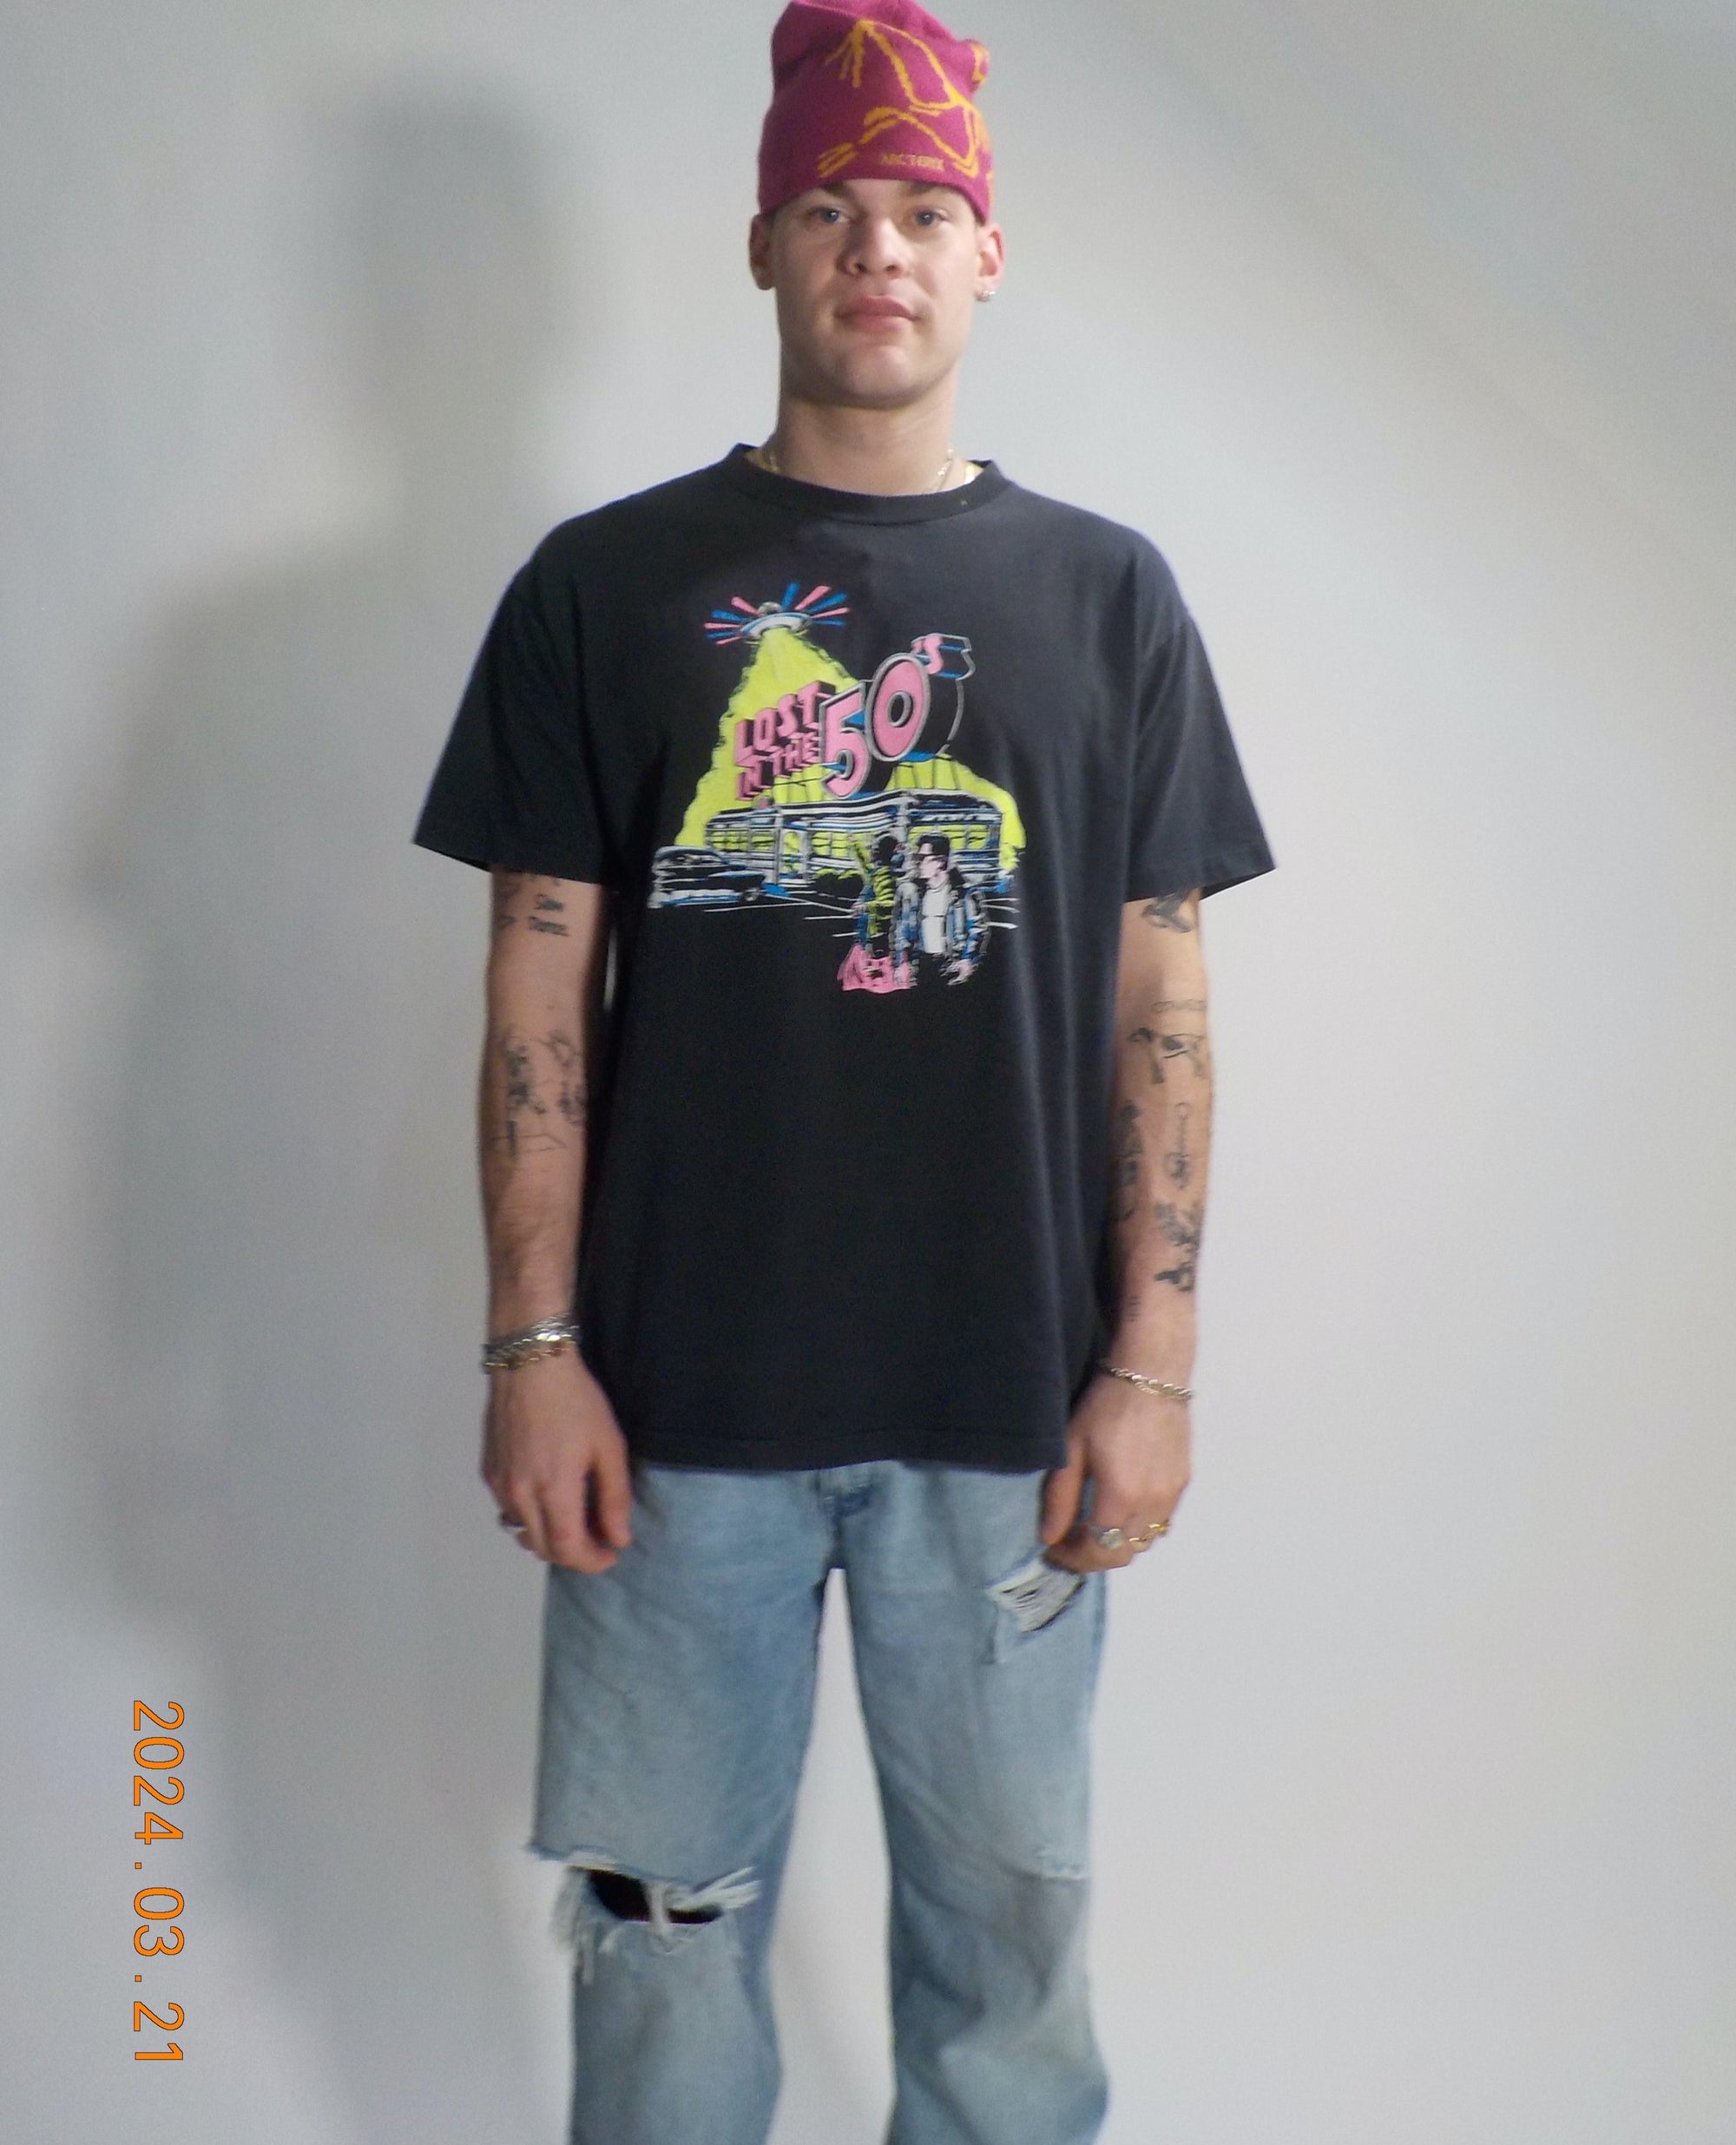 1990S LOST IN THE 50S NEON T-SHIRT